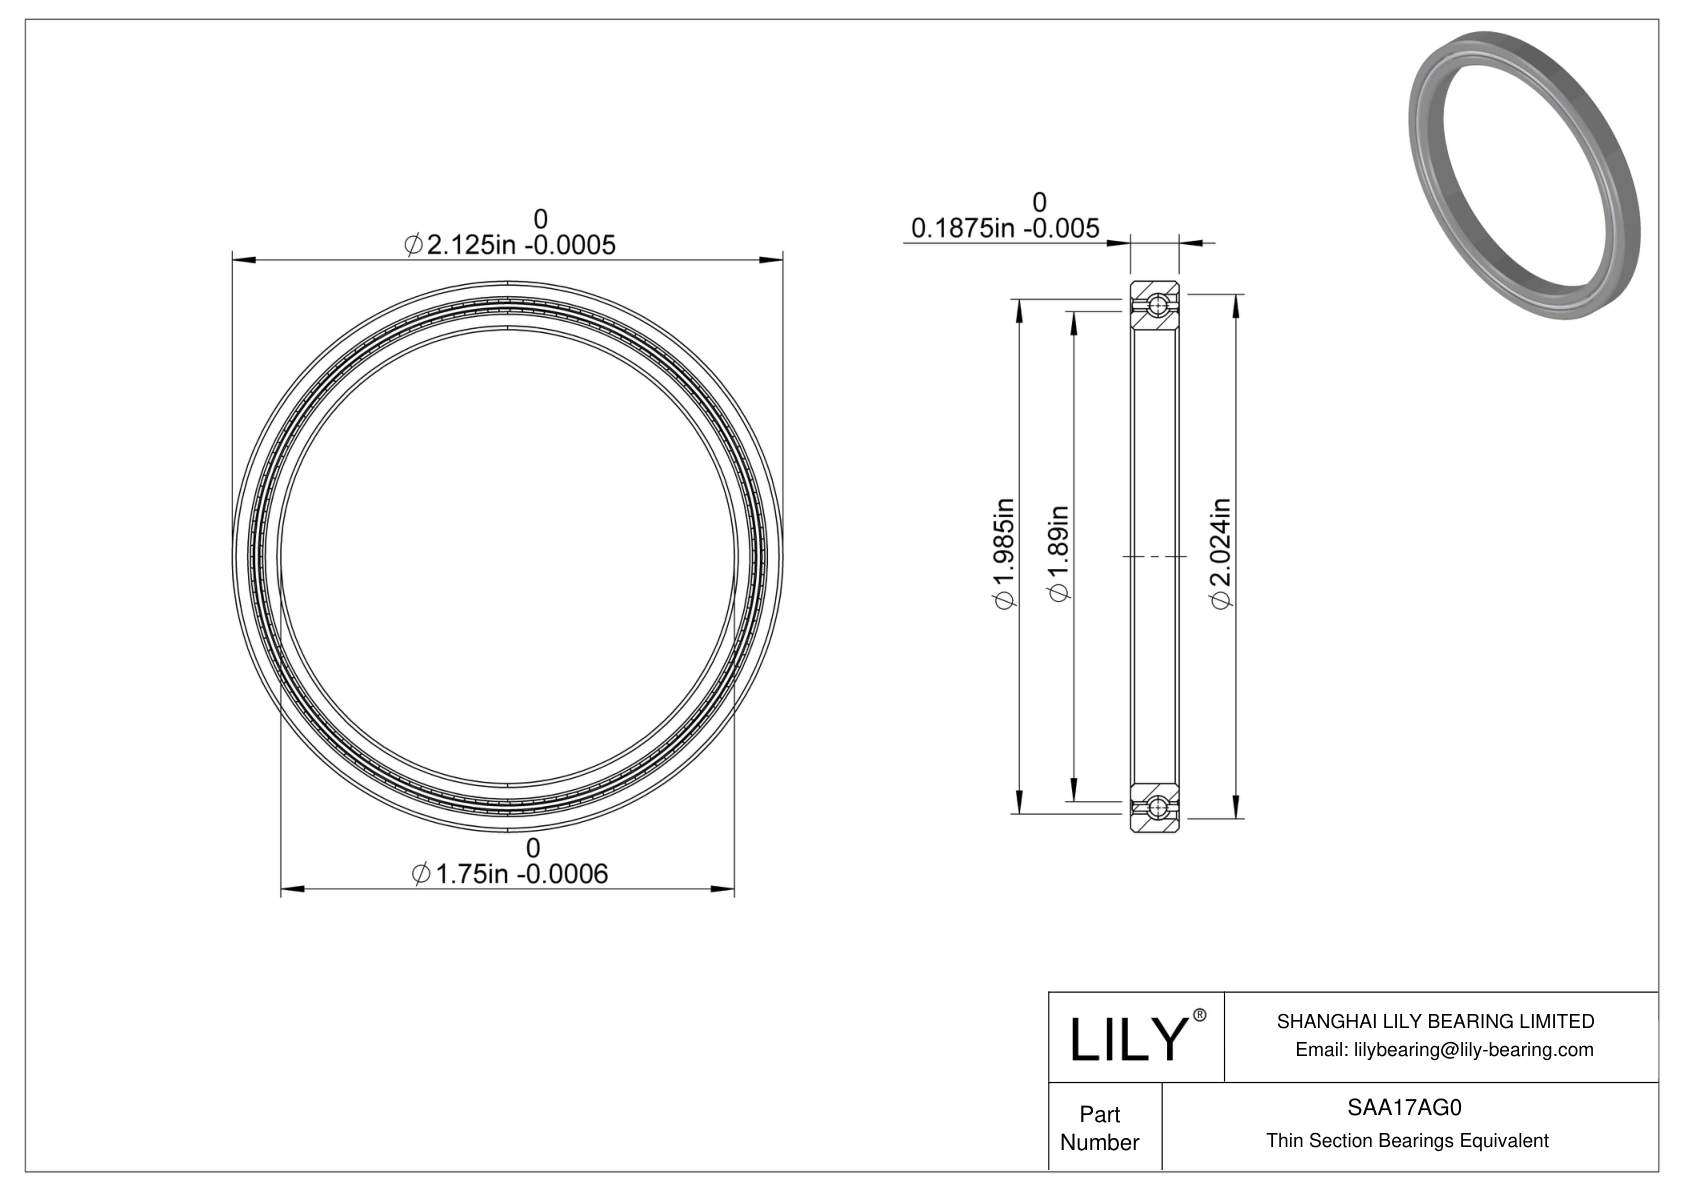 SAA17AG0 Constant Section (CS) Bearings cad drawing